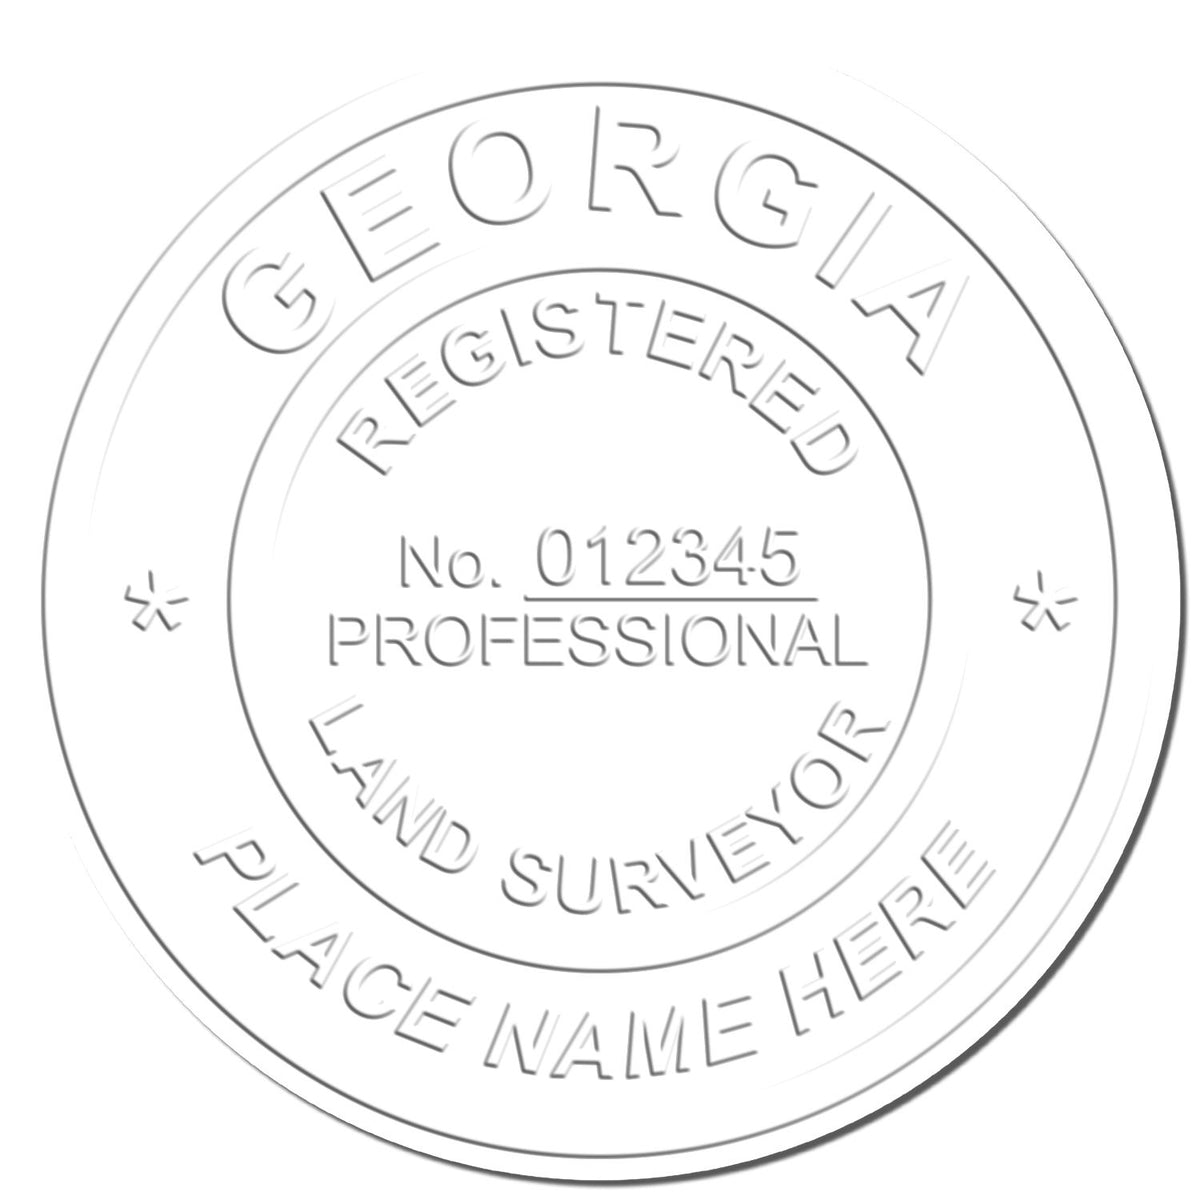 This paper is stamped with a sample imprint of the Long Reach Georgia Land Surveyor Seal, signifying its quality and reliability.